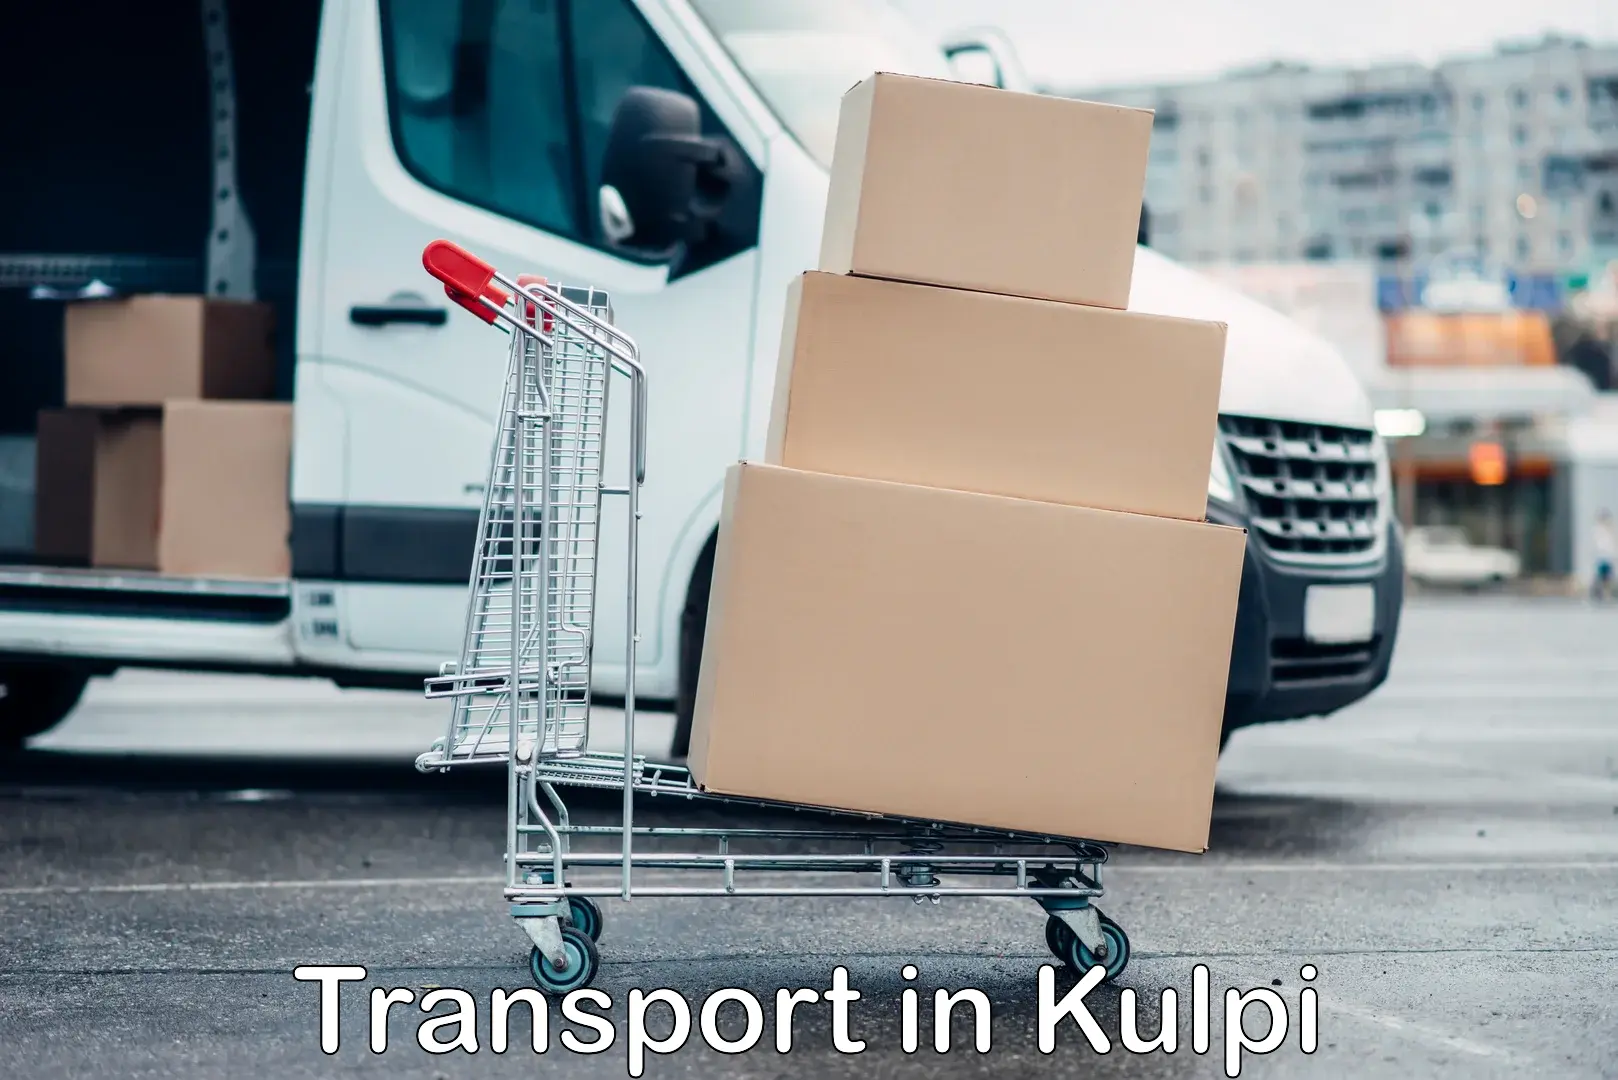 Daily transport service in Kulpi